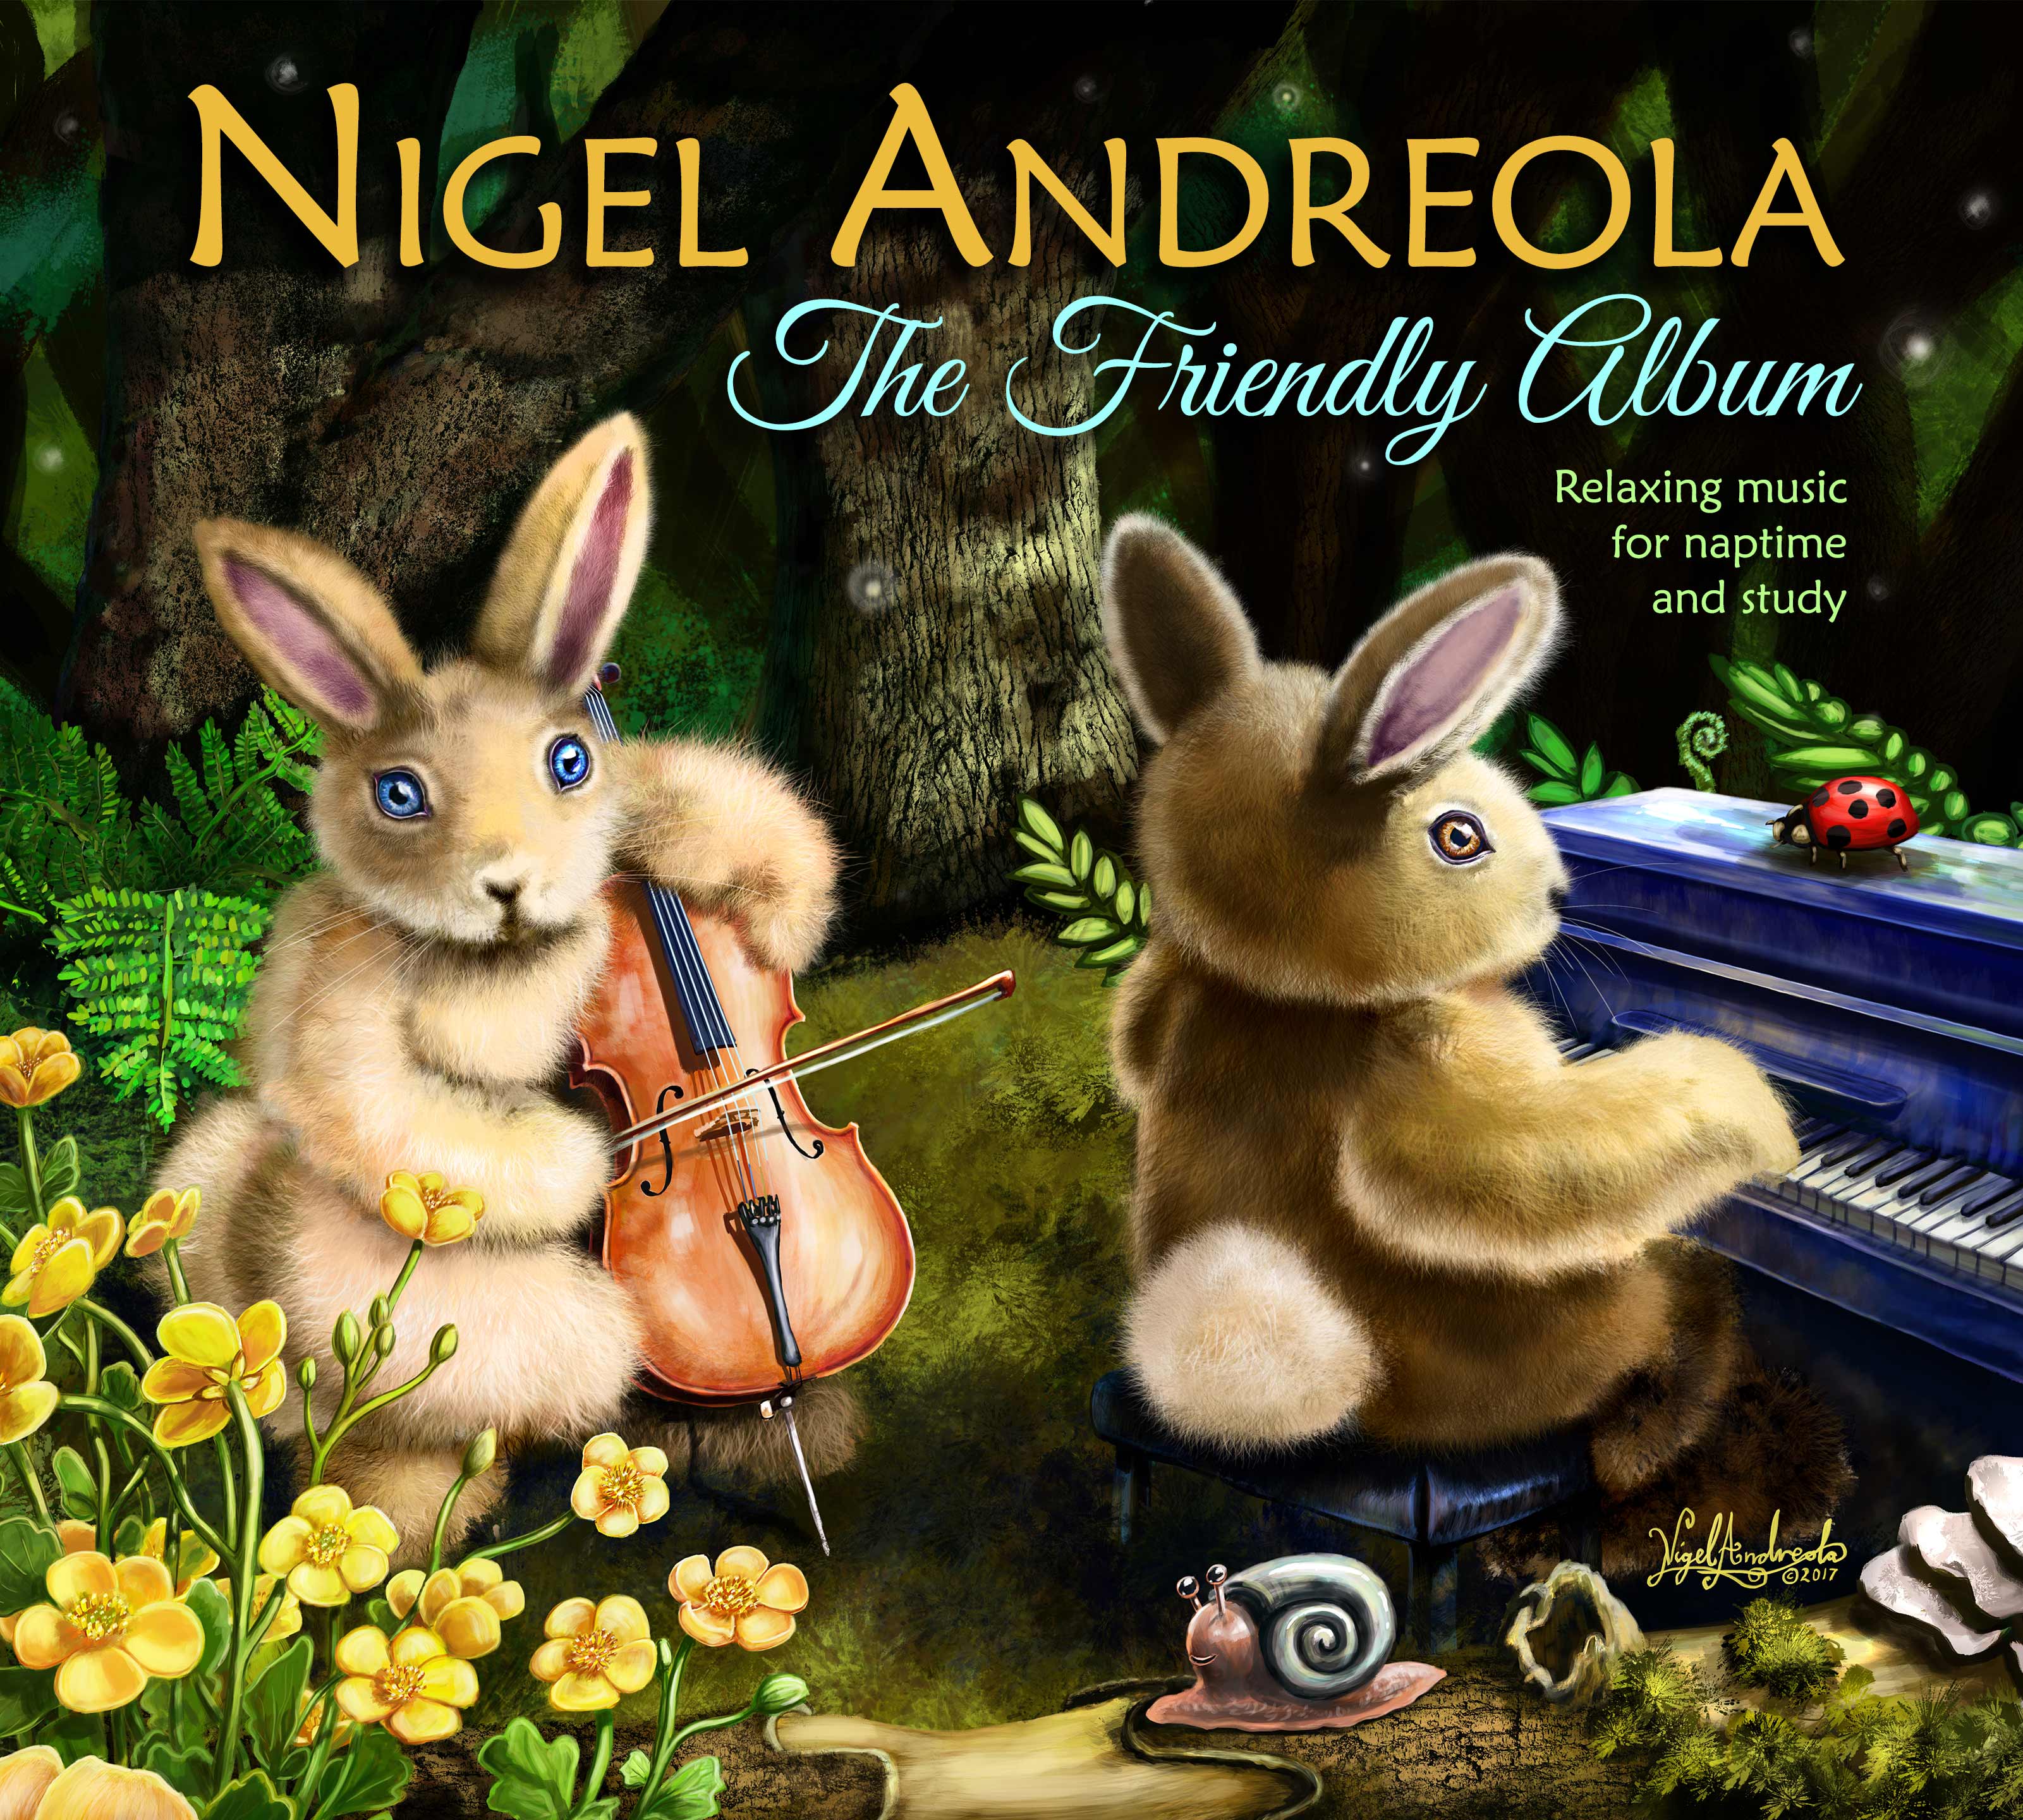 The Friendly Album Relaxing music for naptime and study By Nigel Andreola